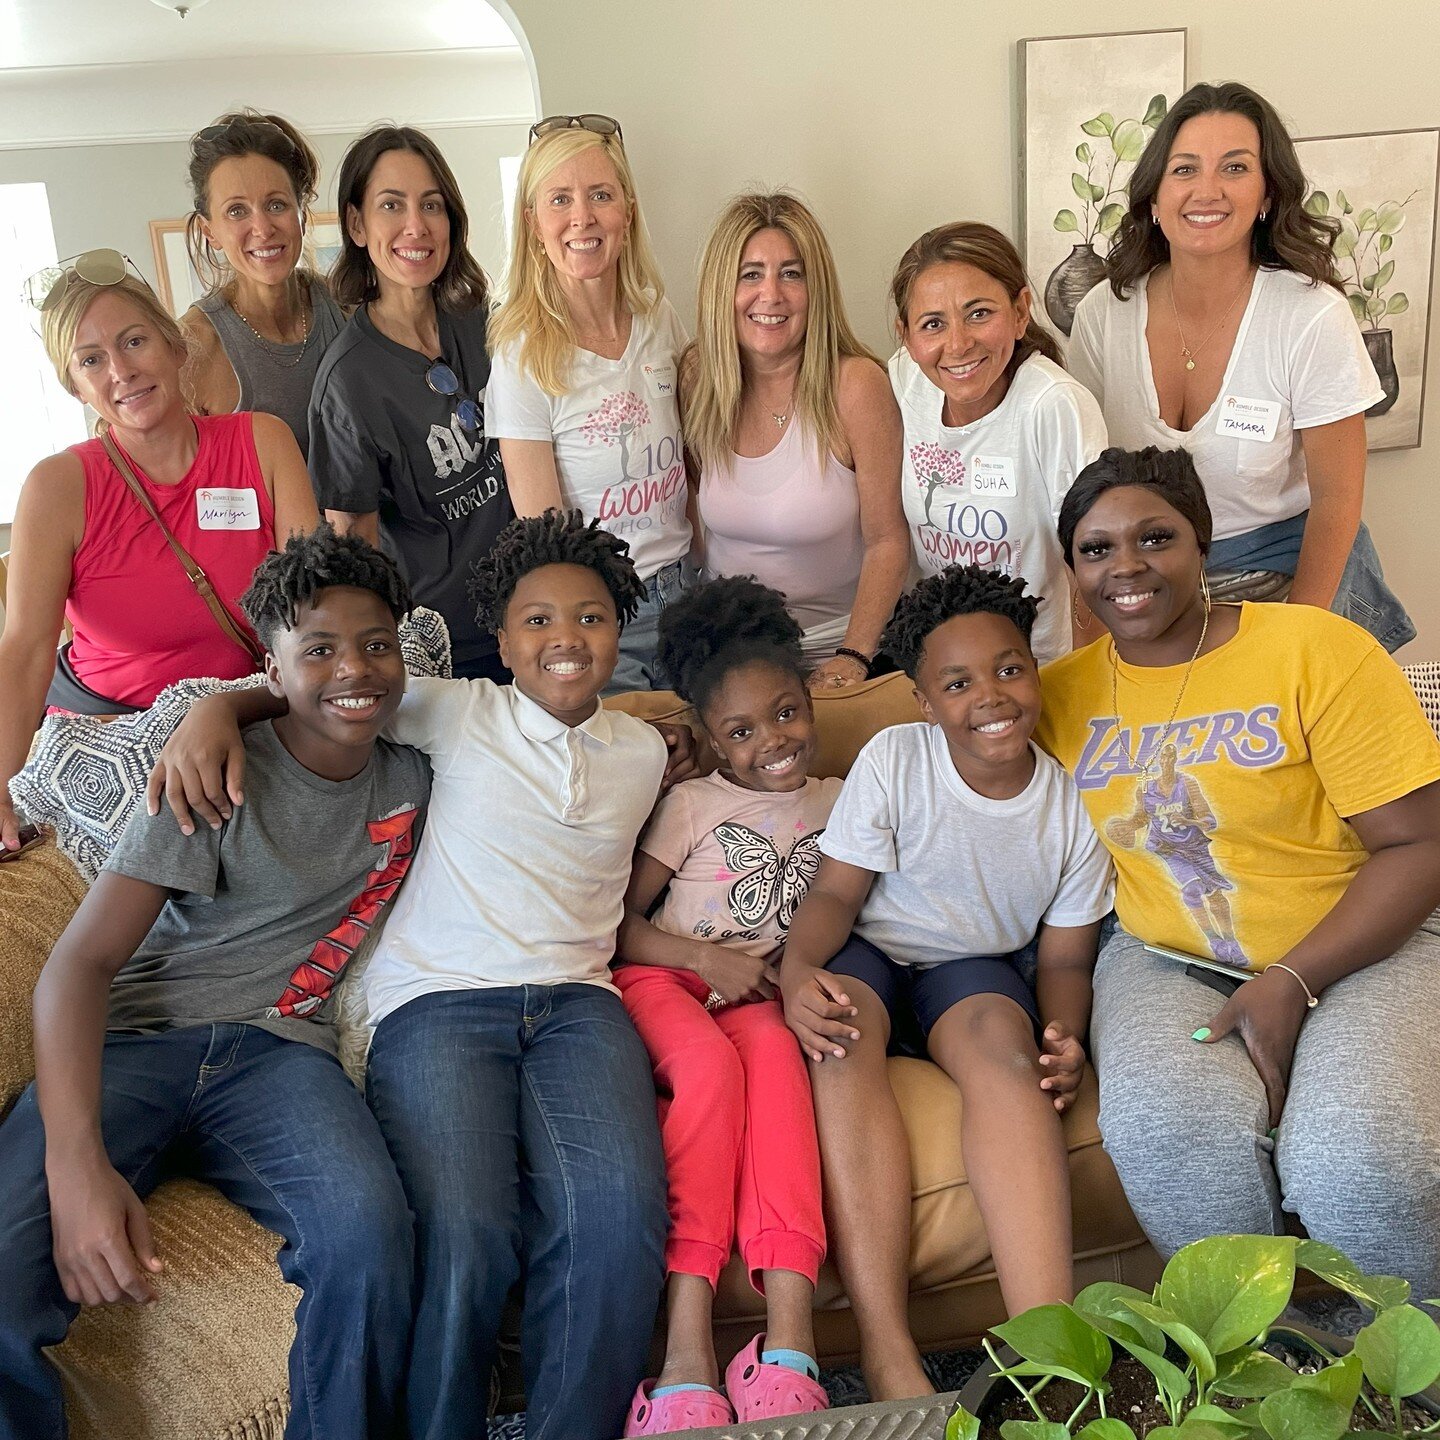 Humble is grateful to help mothers all year long, and we were especially happy to serve Kansis and her four children this week. They journeyed across the country excited to start their next chapter in Detroit, only for Kansis to find herself in a sit